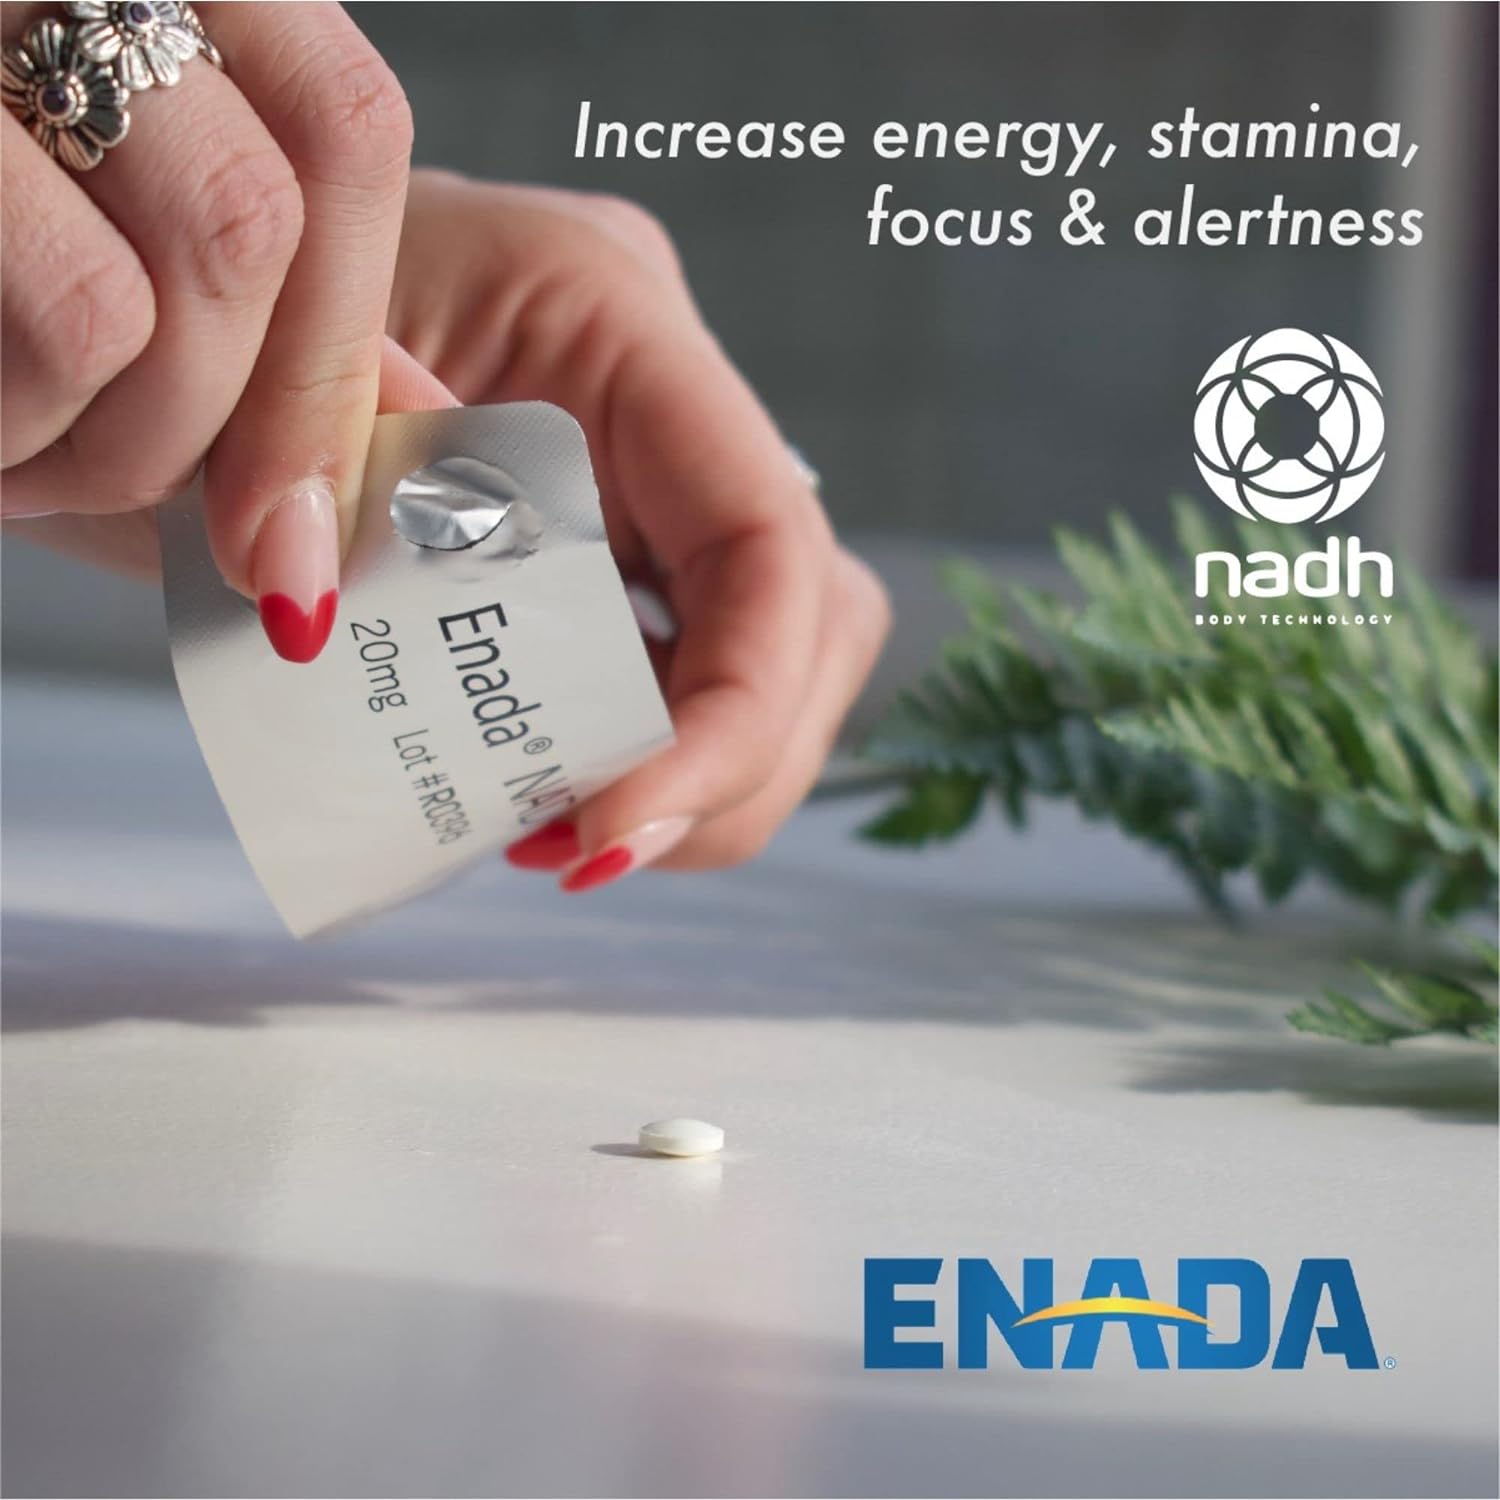 ENADA 20 x NADH Supplement | Boost Energy, Mental Focus, Stamina | Support Fatigue, Cell Regenerator | 20mg NADH 30 Lozenges (1 per serving) | Natural Energy Supplements for Women and Men